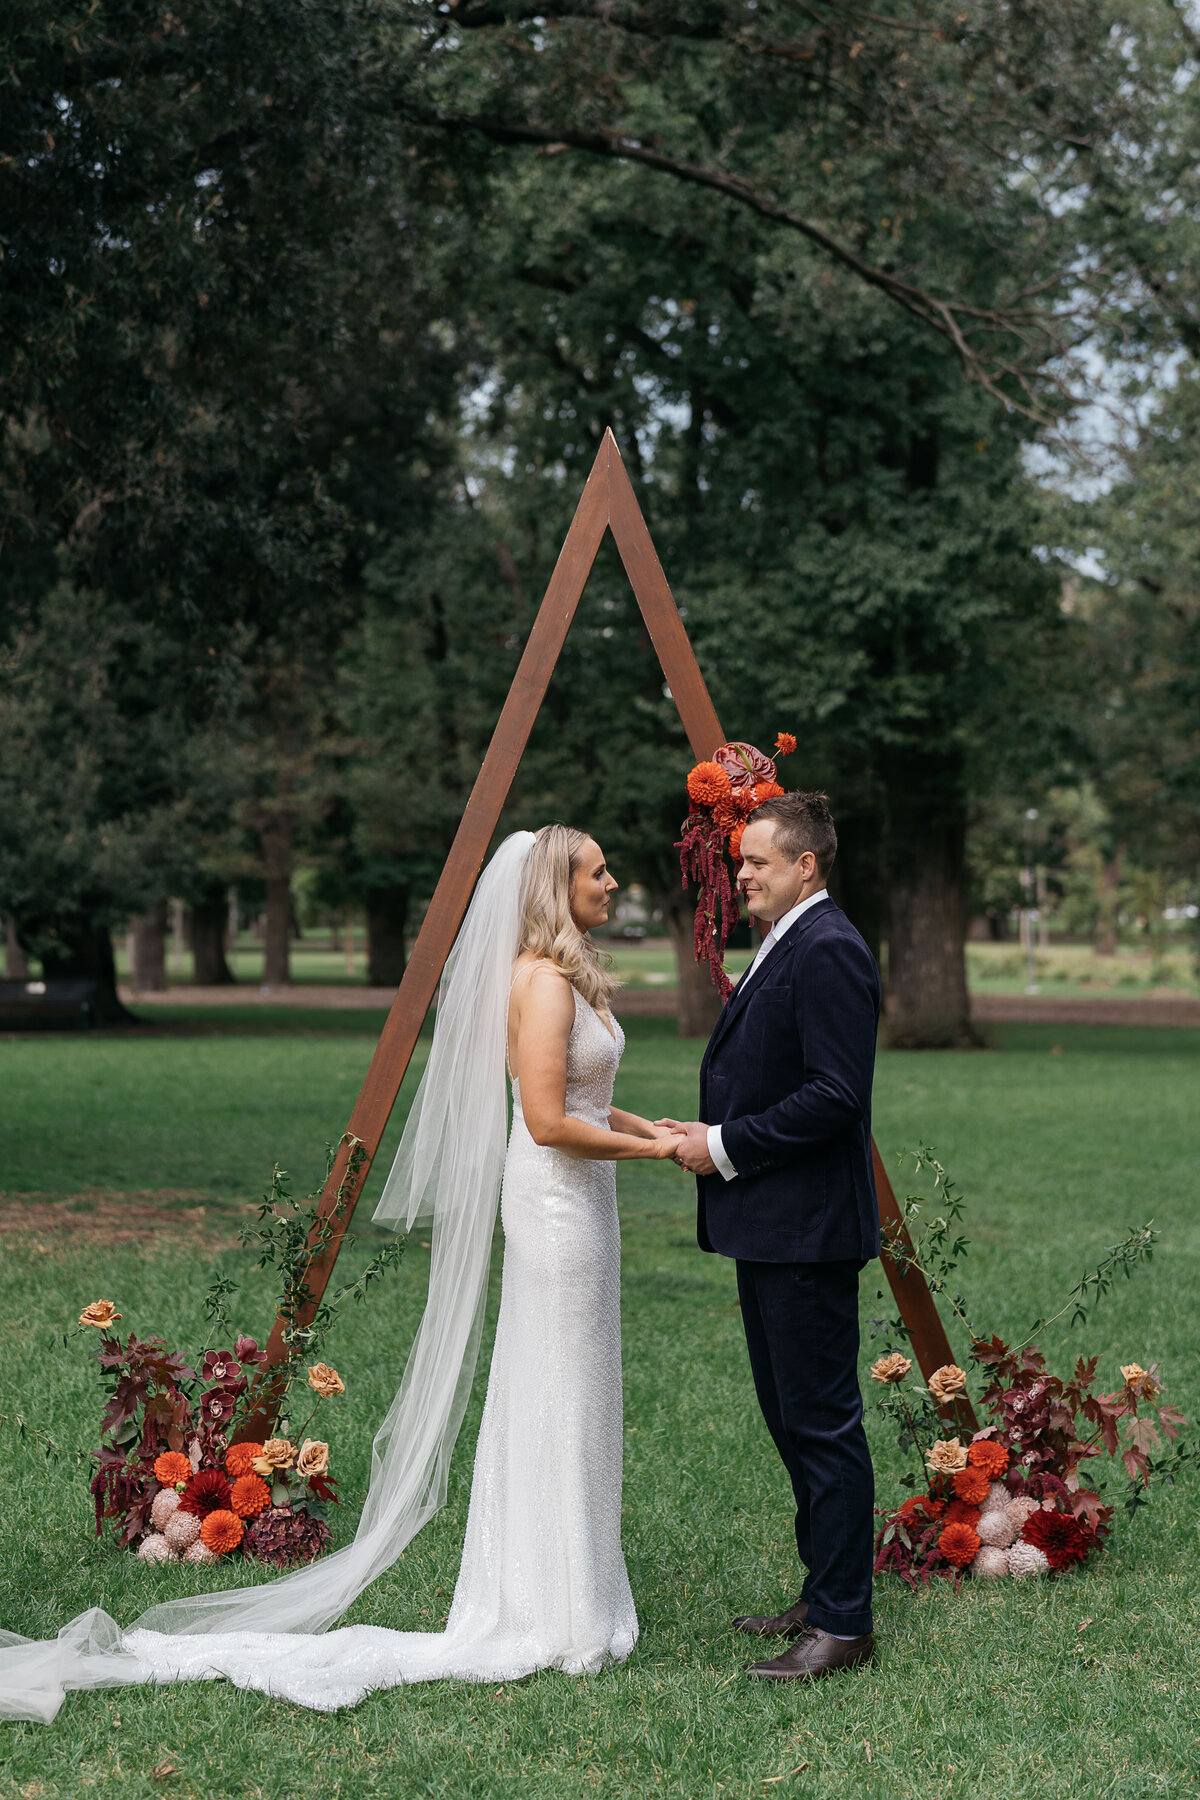 Courtney Laura Photography, Melbourne Wedding Photographer, Fitzroy Nth, 75 Reid St, Cath and Mitch-356